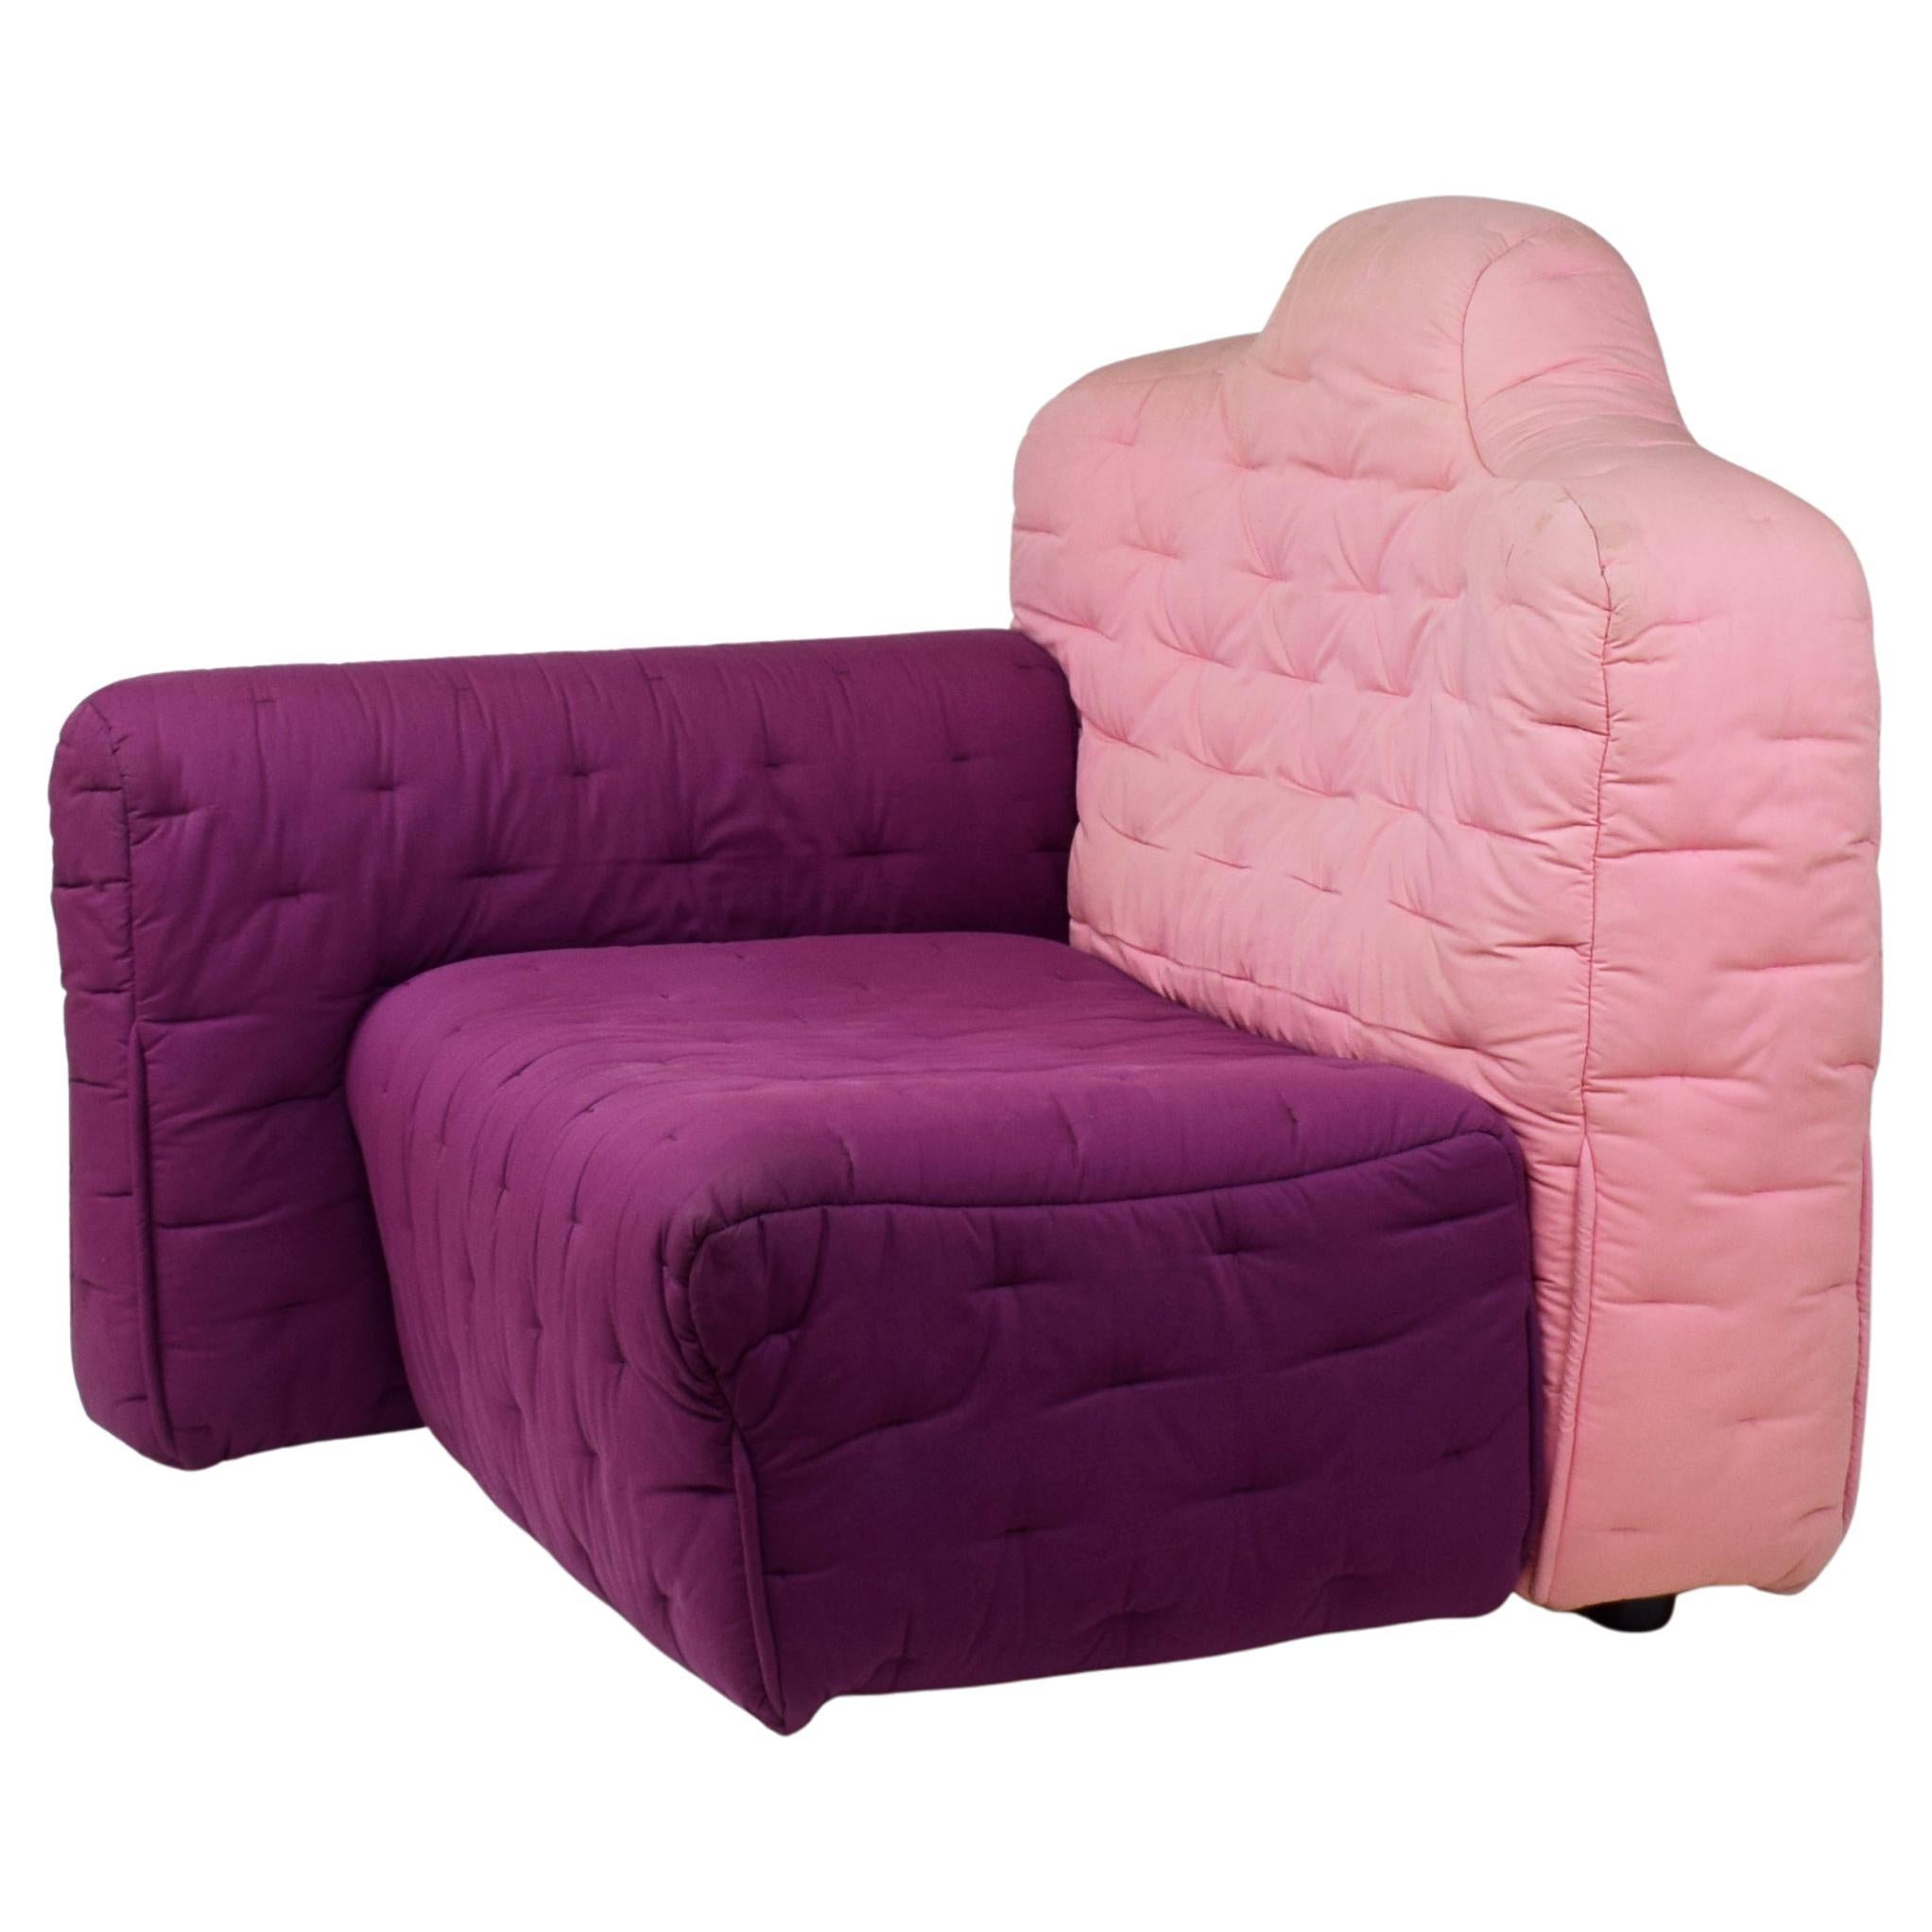 Gaetano Pesce, 'Cannaregio' Armchair, Cassina Italy 1987, Large Pink and  Purple For Sale at 1stDibs